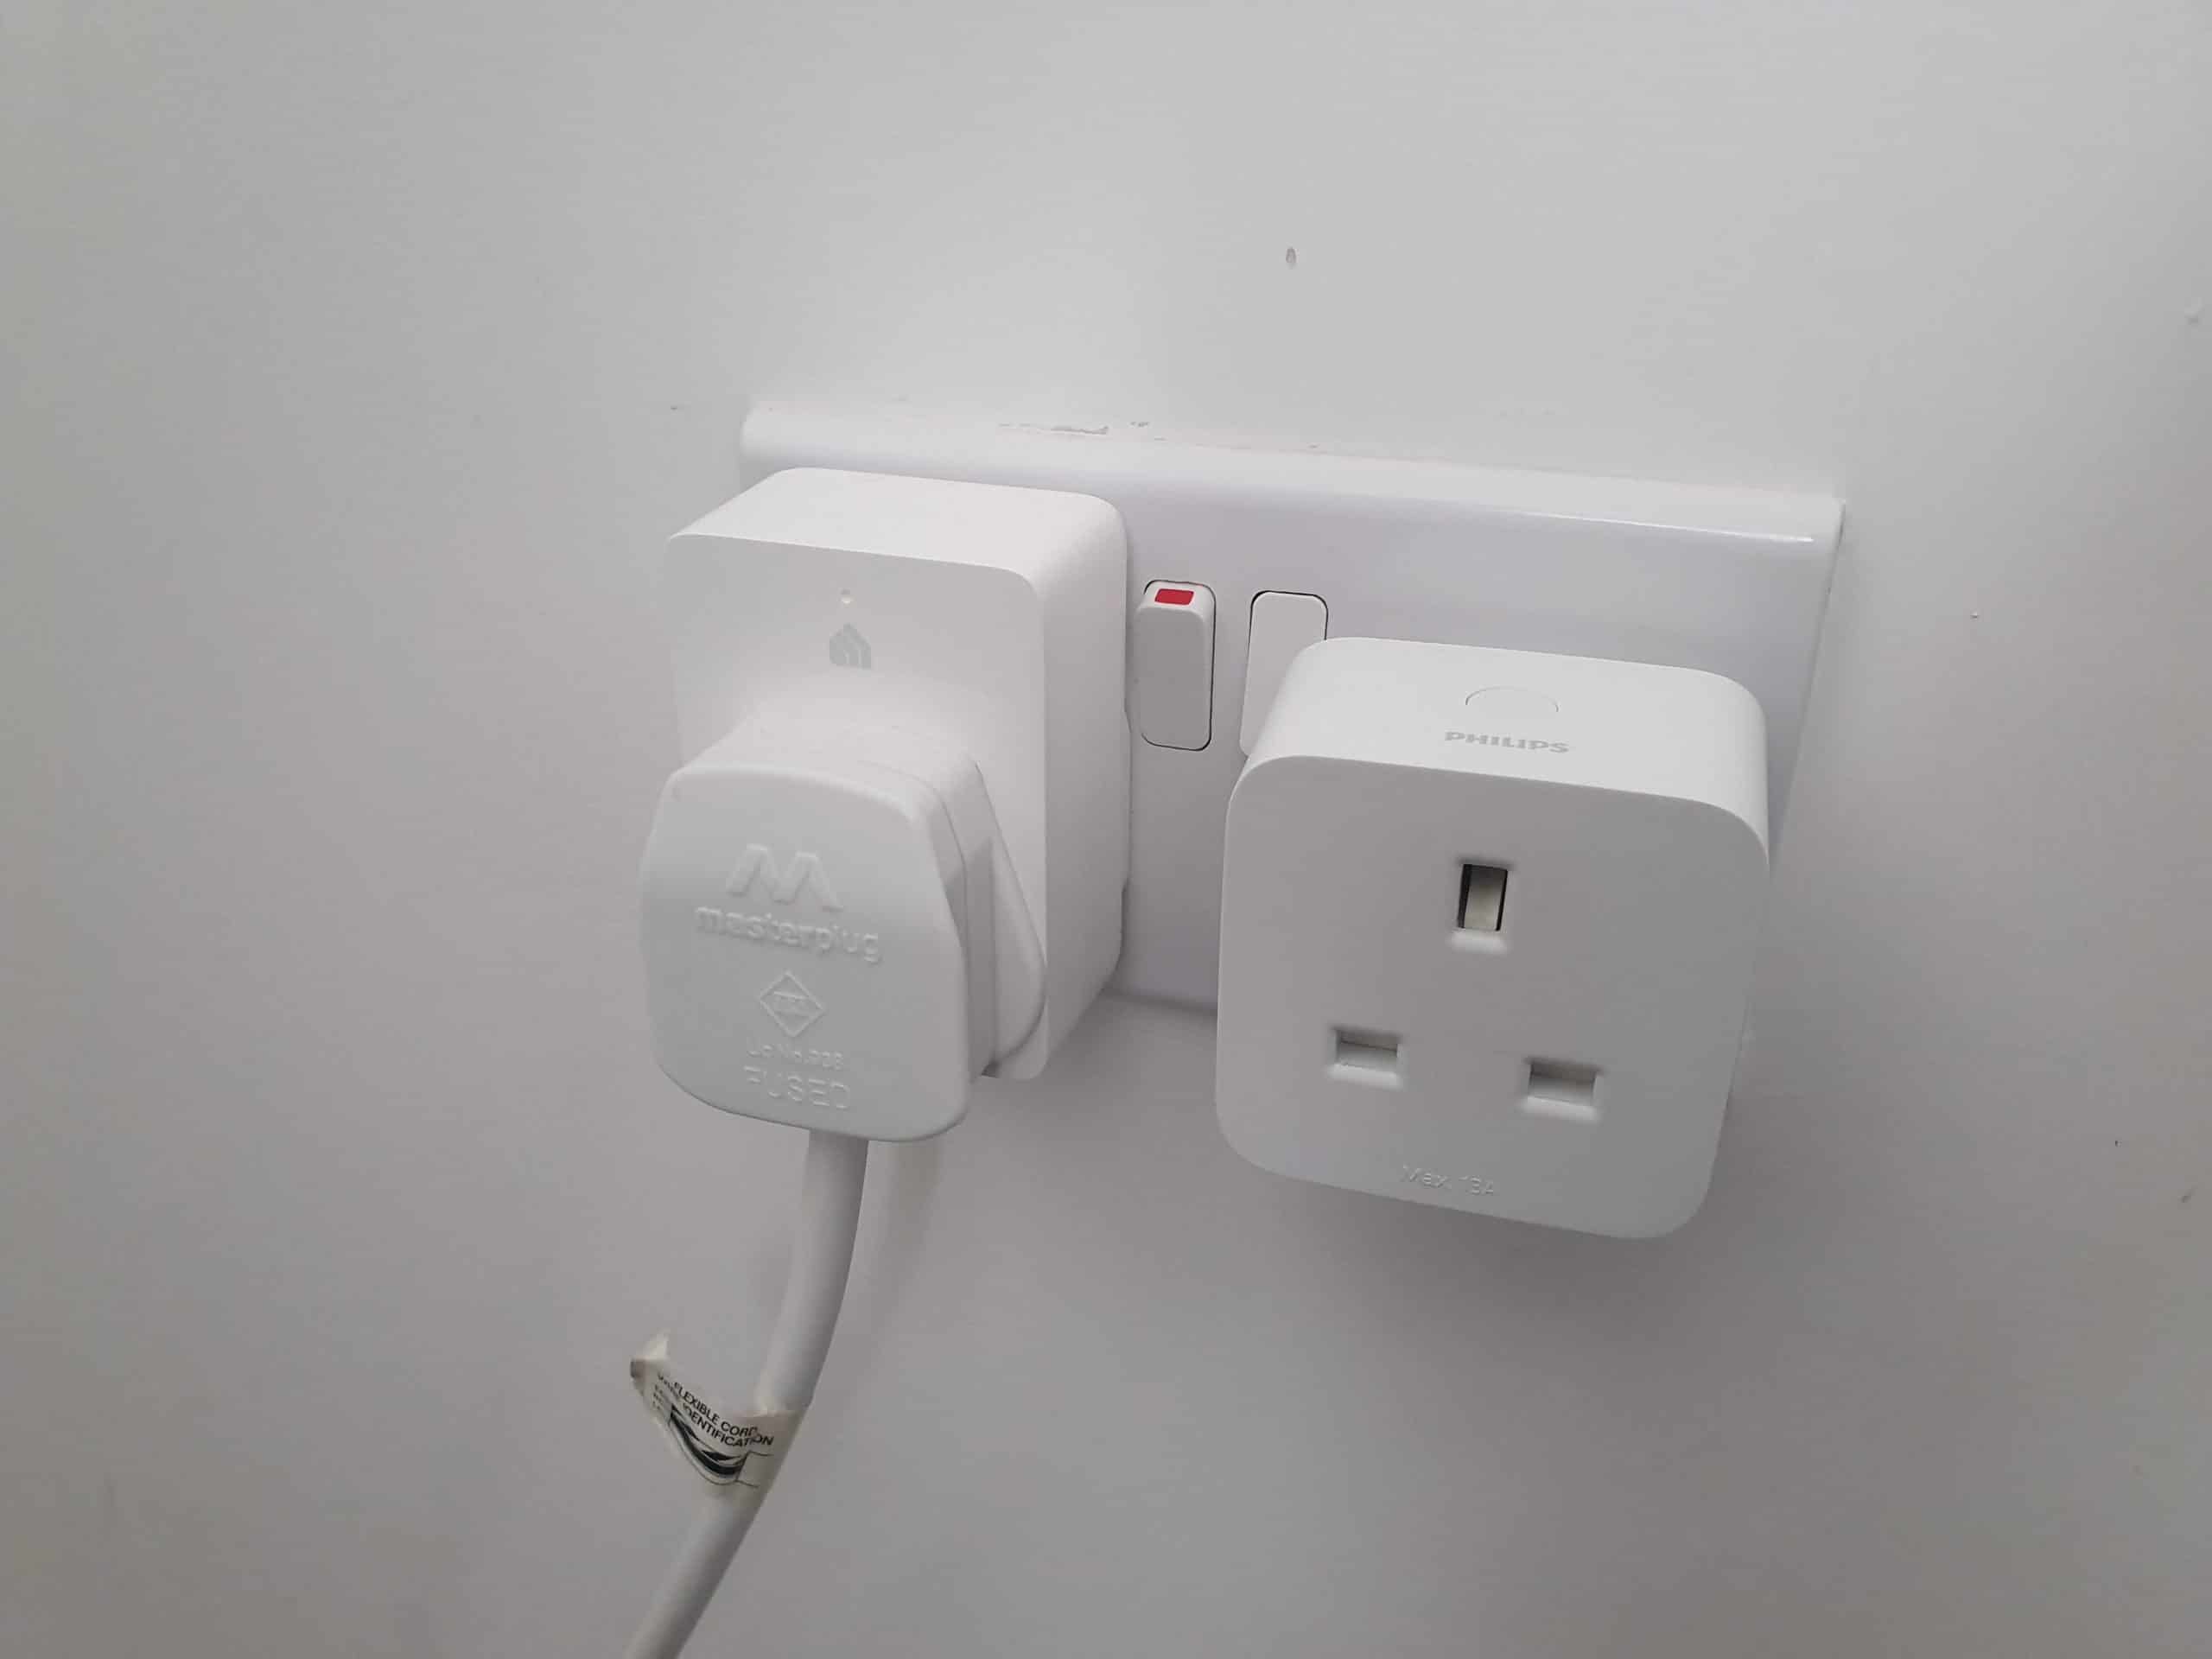 https://www.smarthomewinner.com/wp-content/uploads/2021/10/Two-smart-plugs-a-TP-Link-Kasa-and-Philips-Hue-one-side-by-side-in-a-UK-wall-socket-scaled.jpg